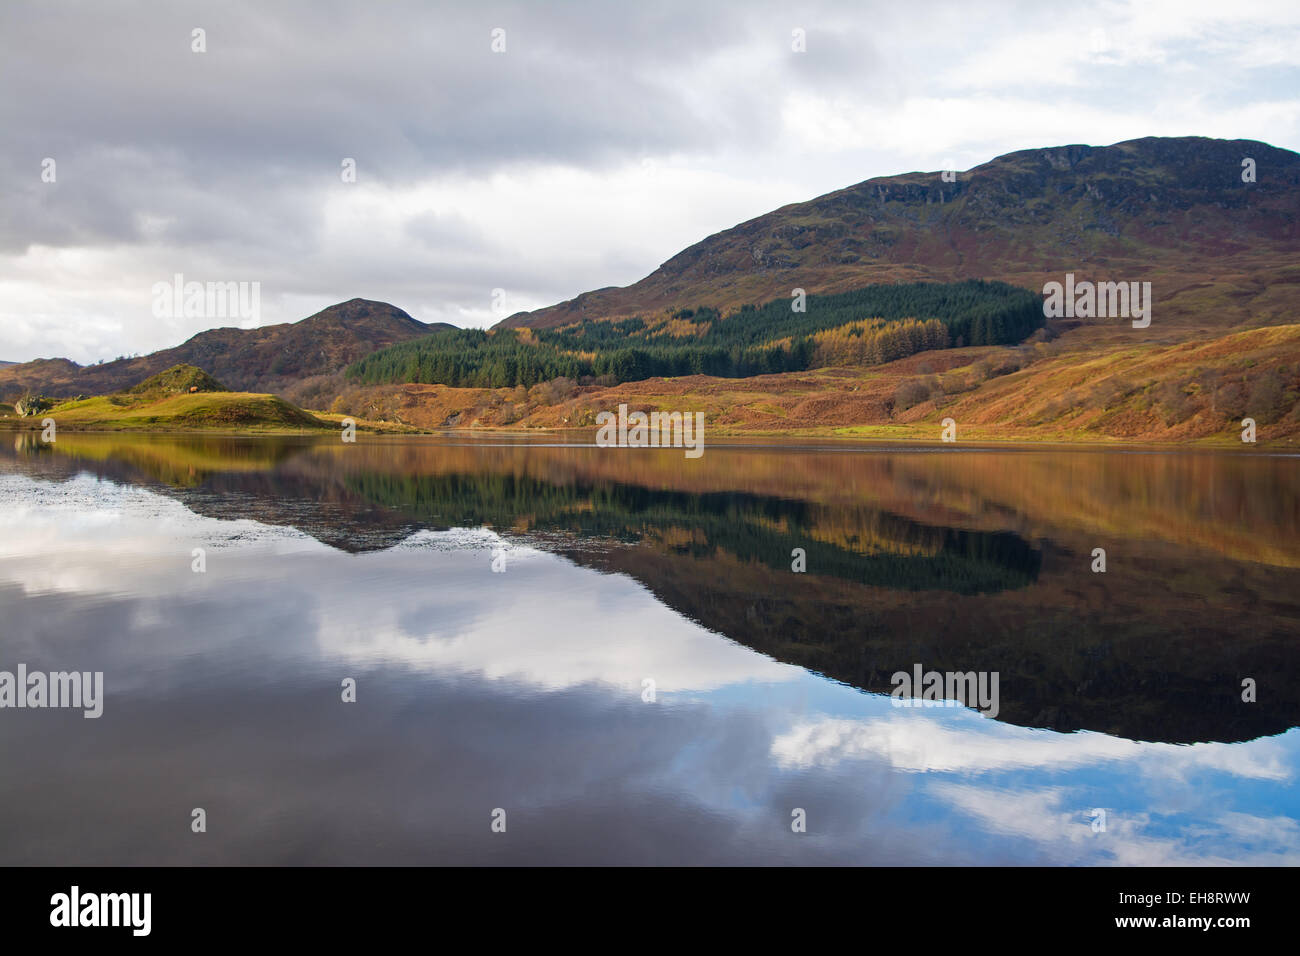 Loch Lubhair water reflections Stock Photo